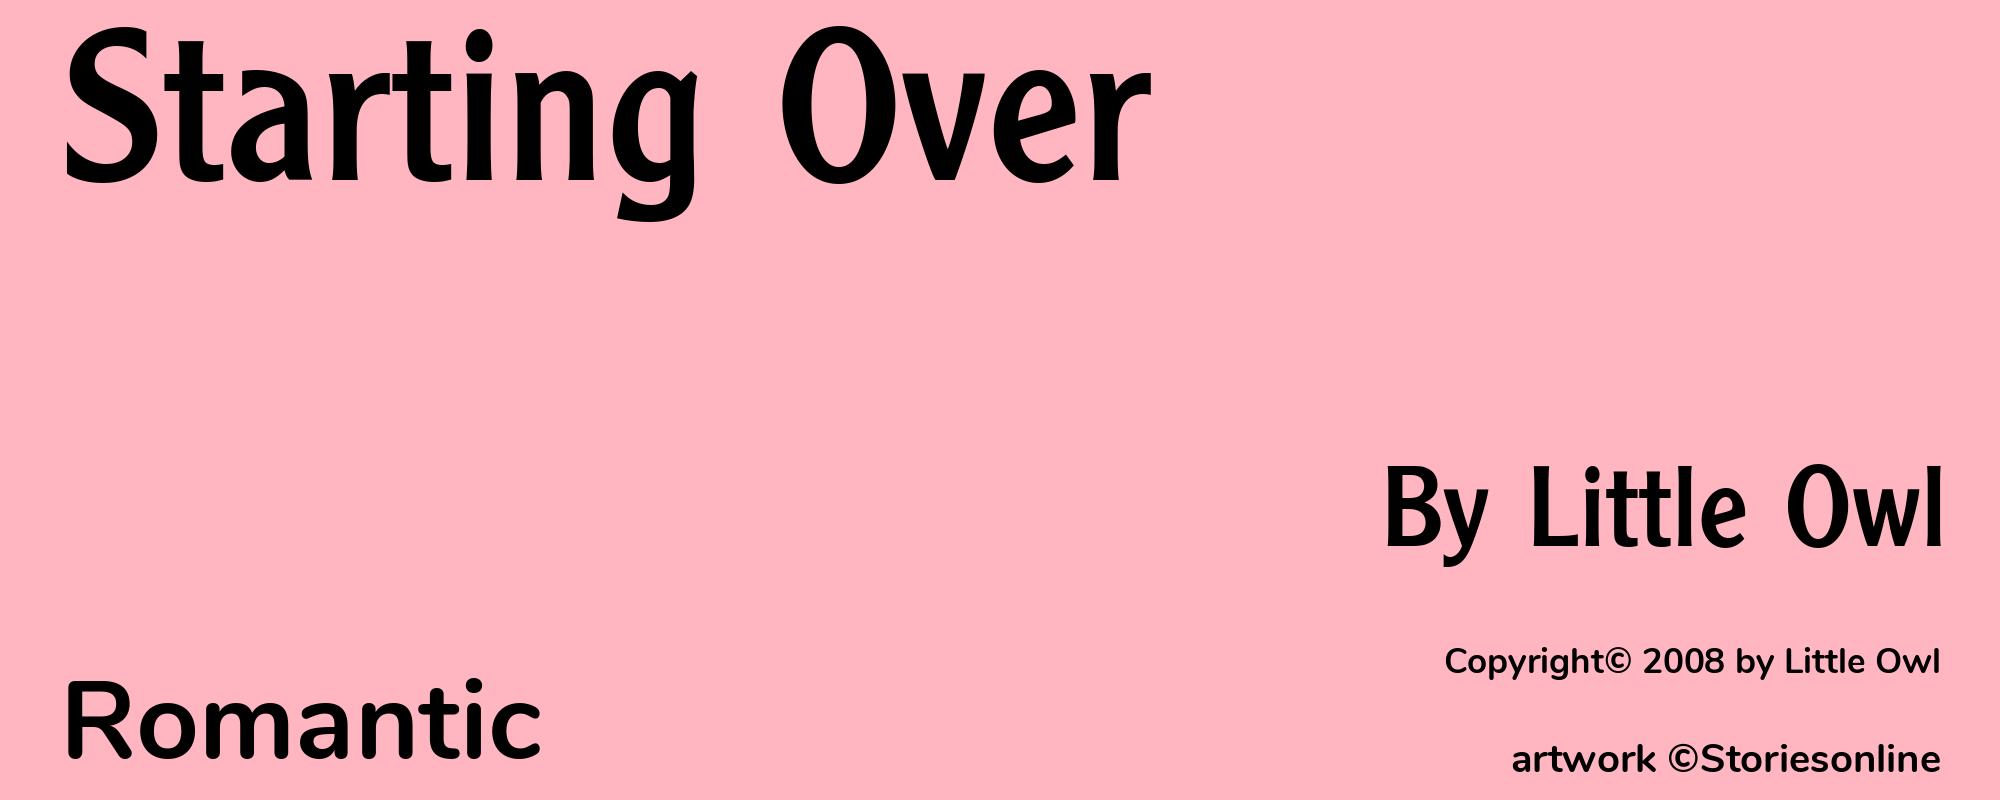 Starting Over - Cover